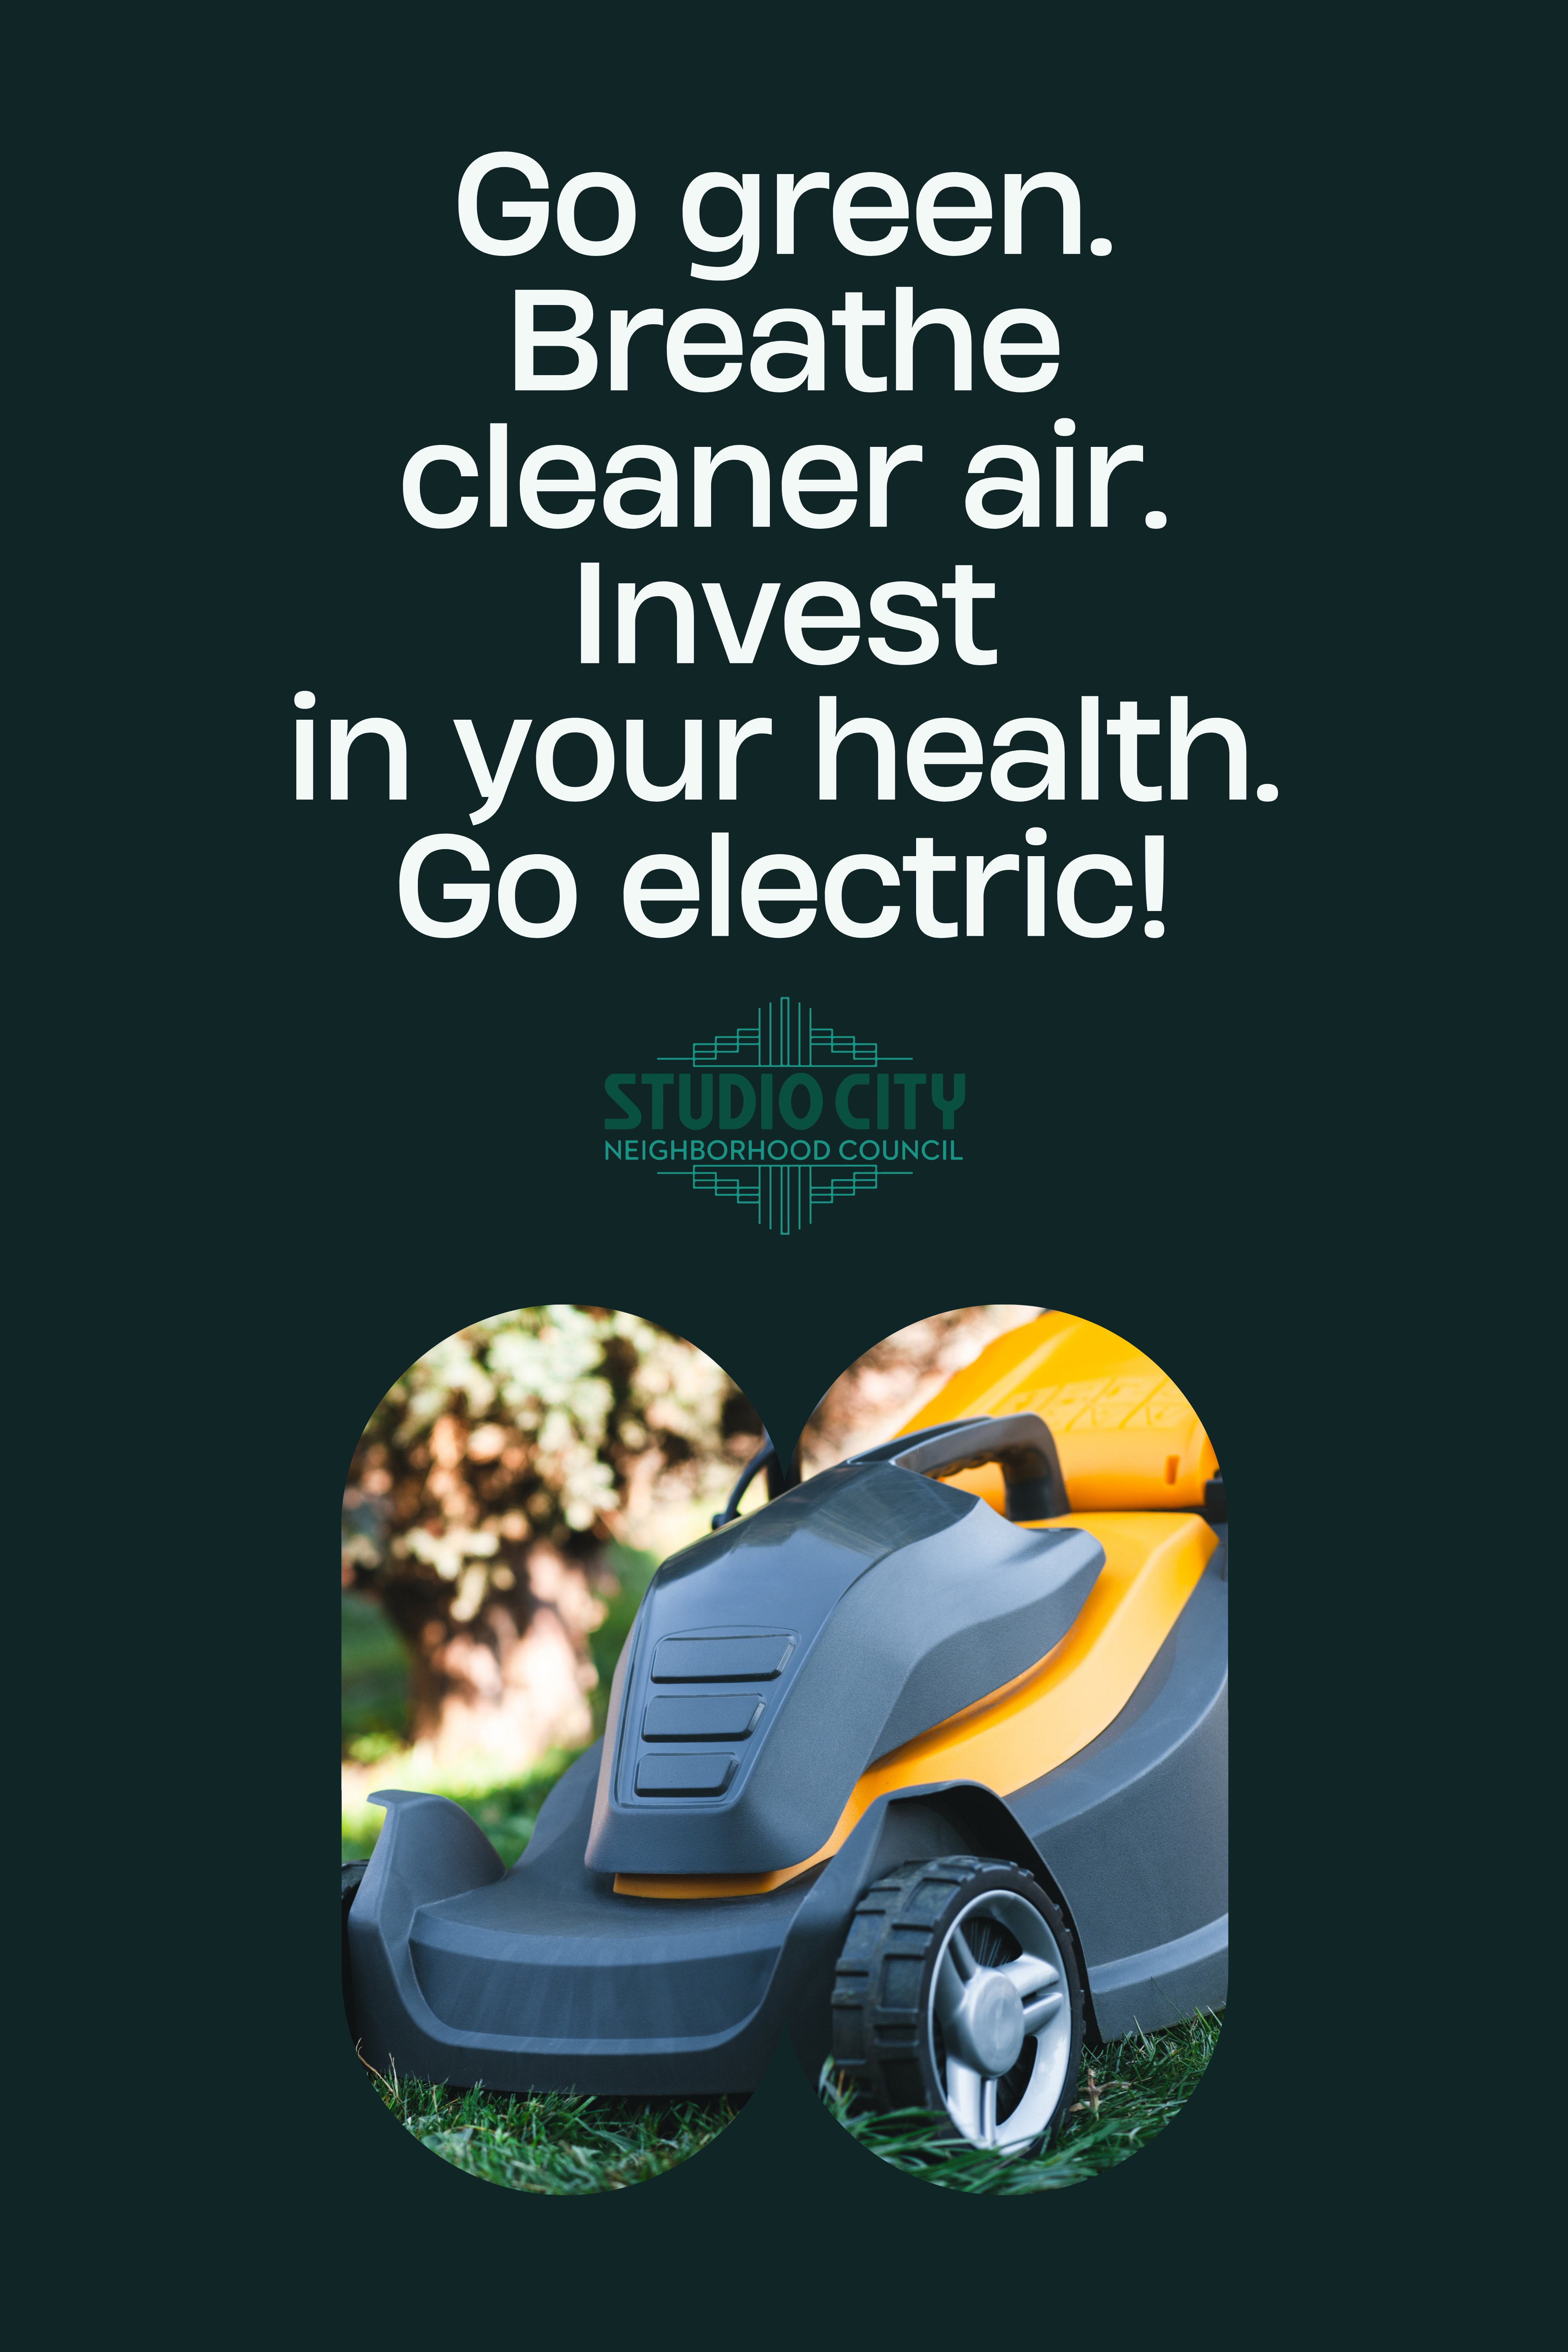 Go green. Breathe Cleaner air. Invest in your health. Go electric!